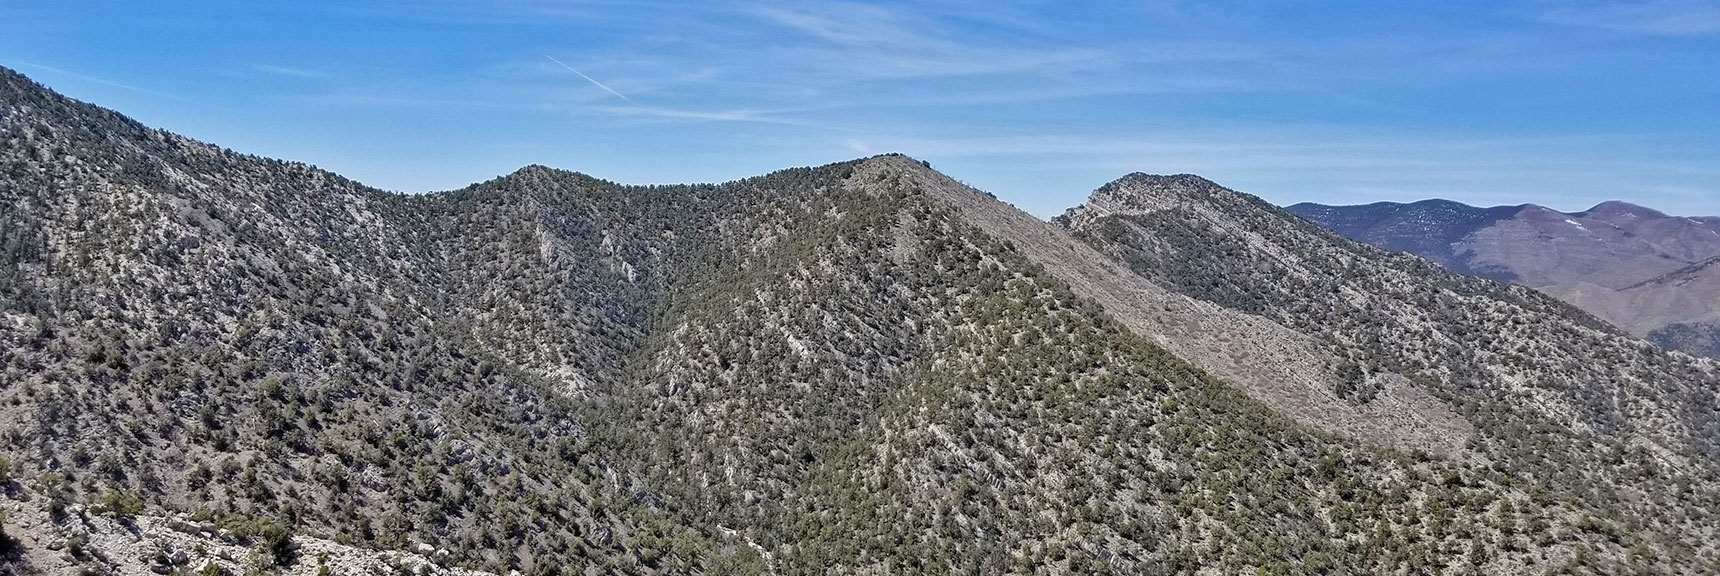 View of El Padre Mountain and Westward Beyond Along Keystone Thrust, Nevada